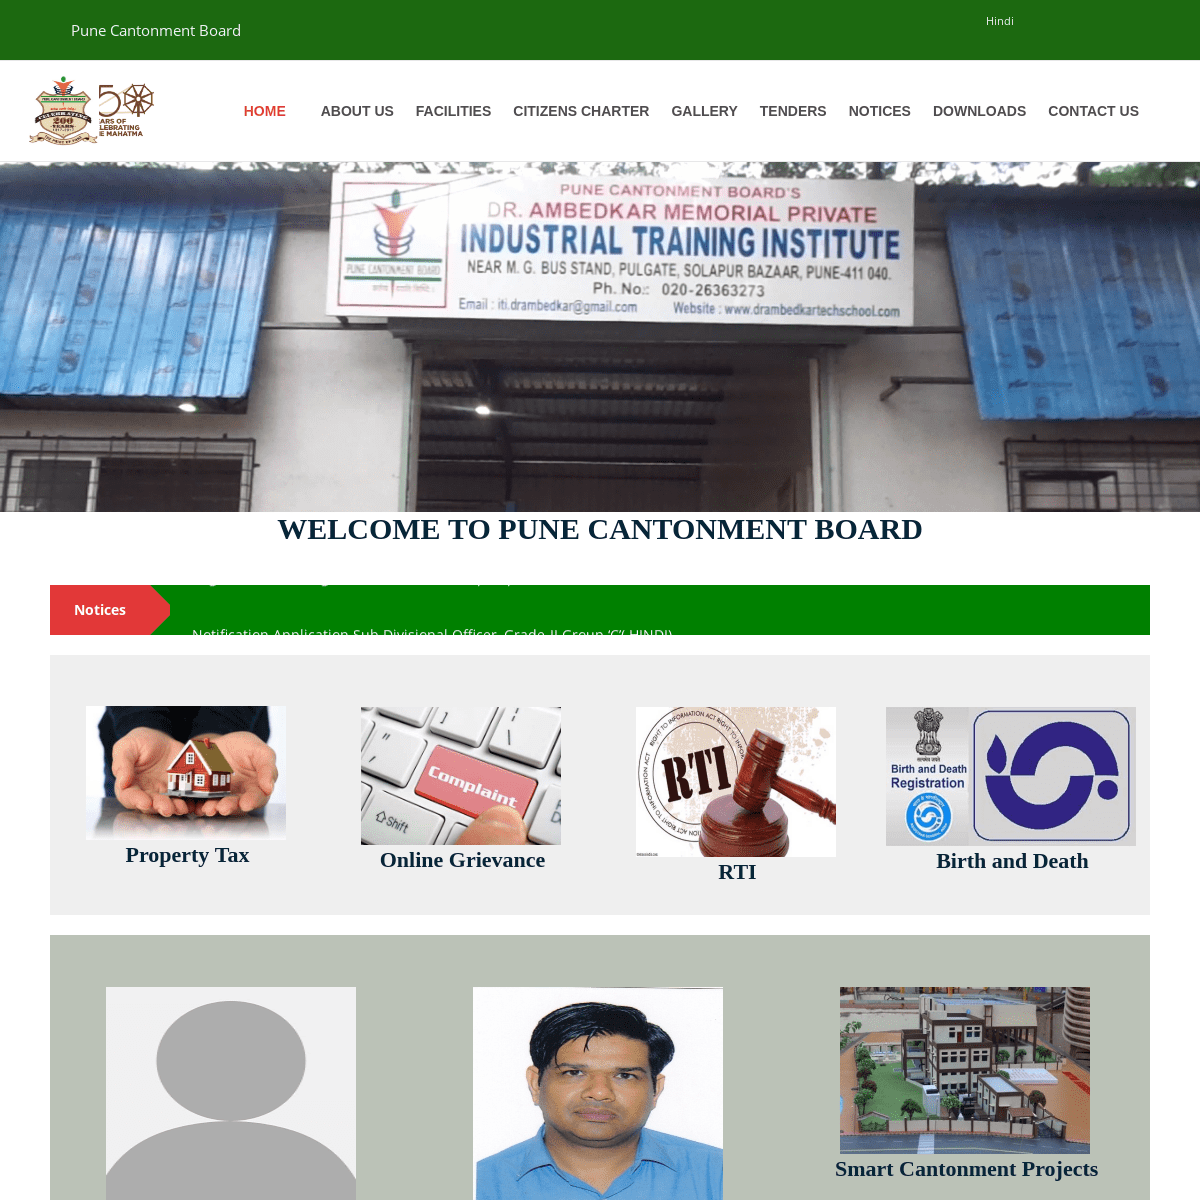 A complete backup of punecantonmentboard.org